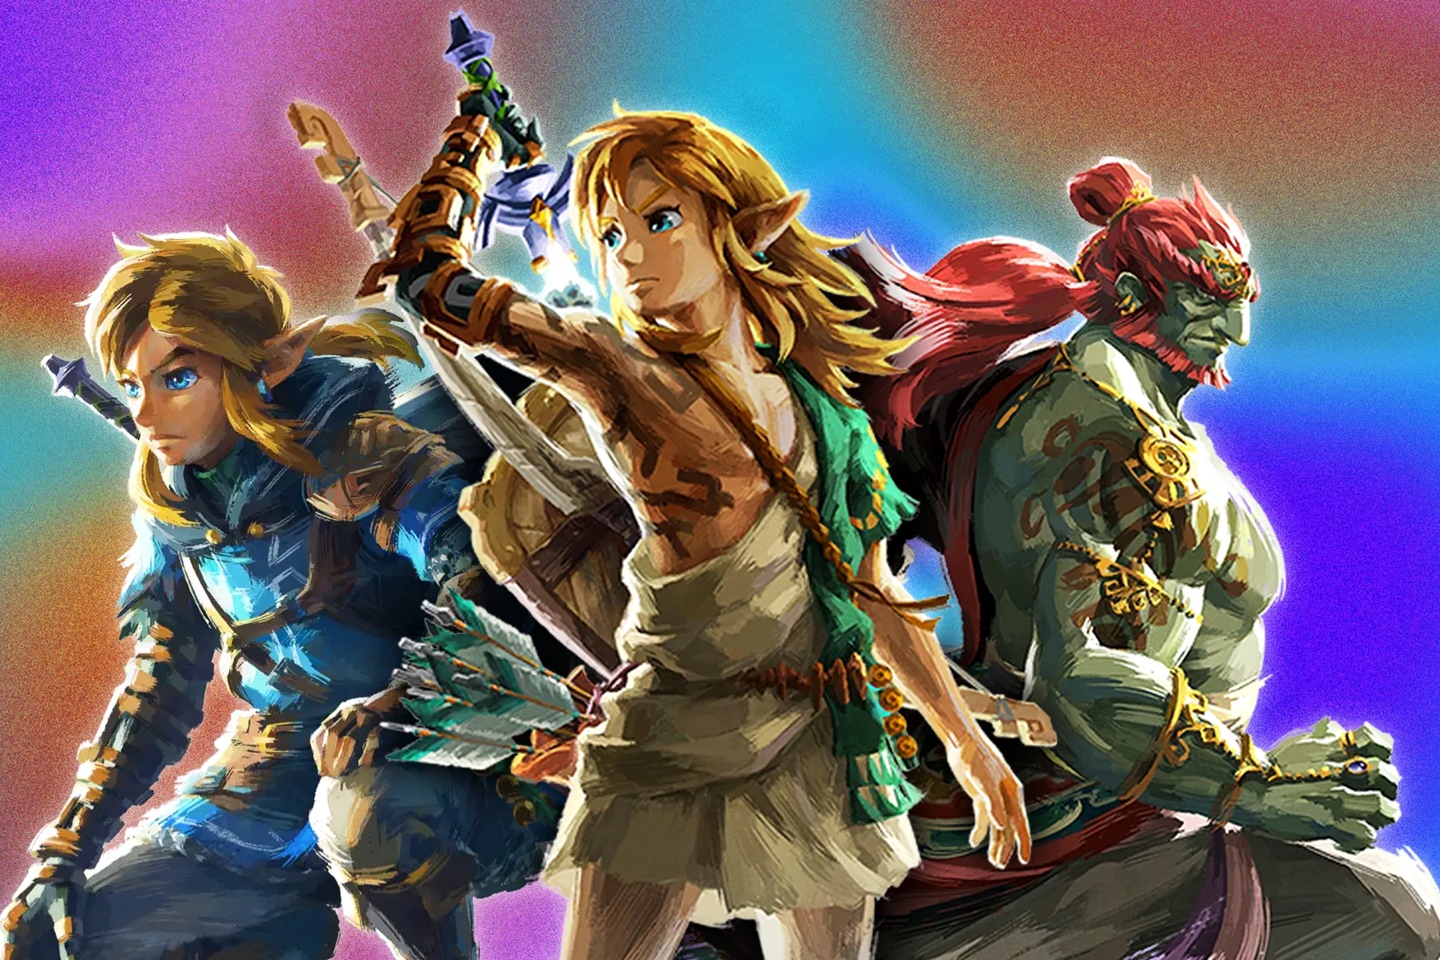 Zelda franchise is one of the most pirated on Nintendo Switch.